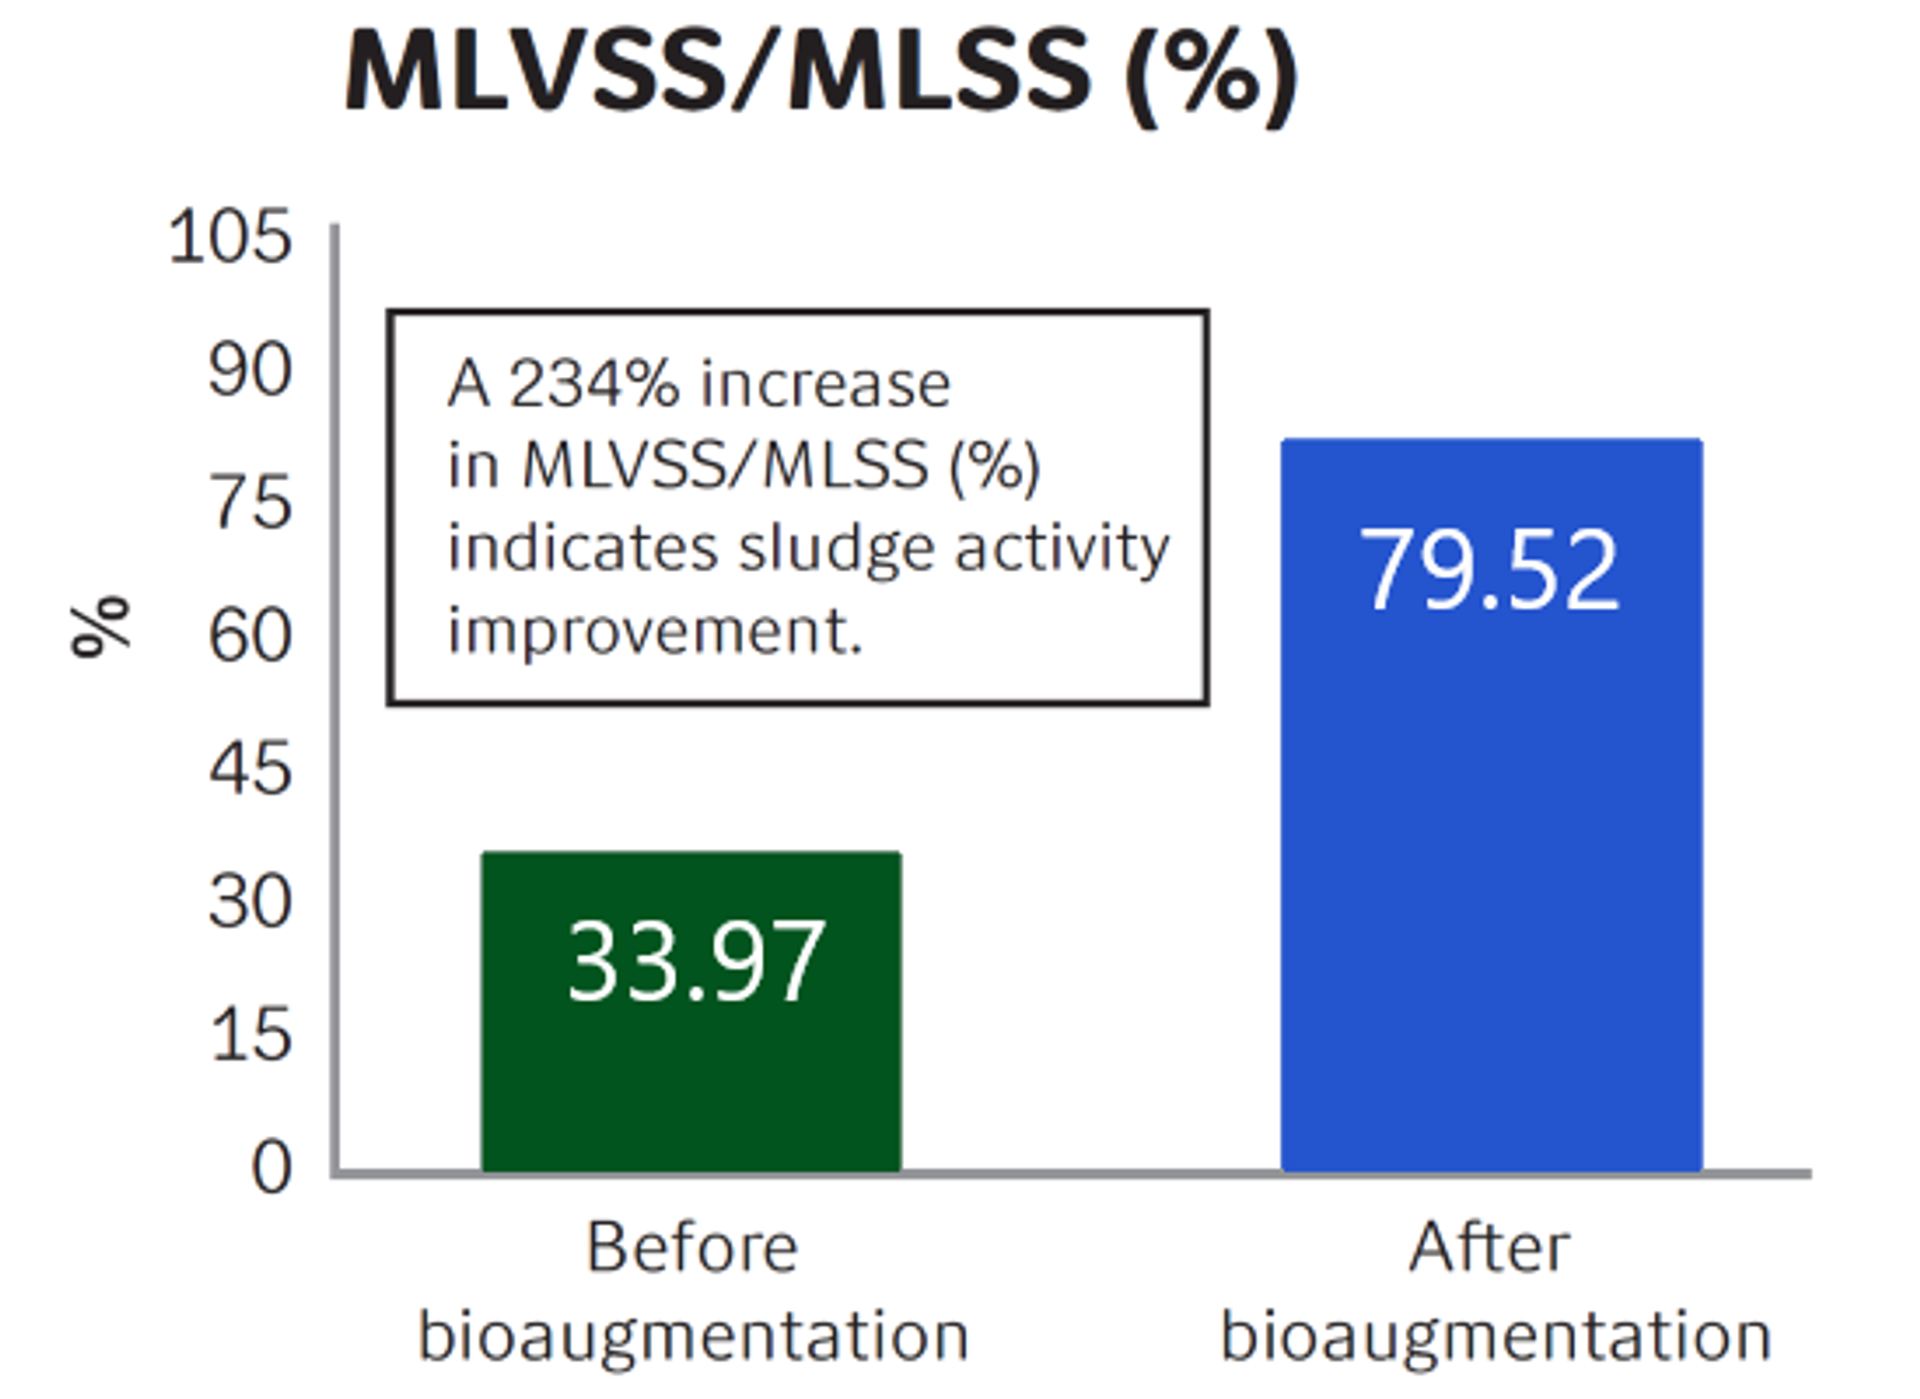 Comparison of MLVSS/MLSS (%) before and after bioaugmentation.@